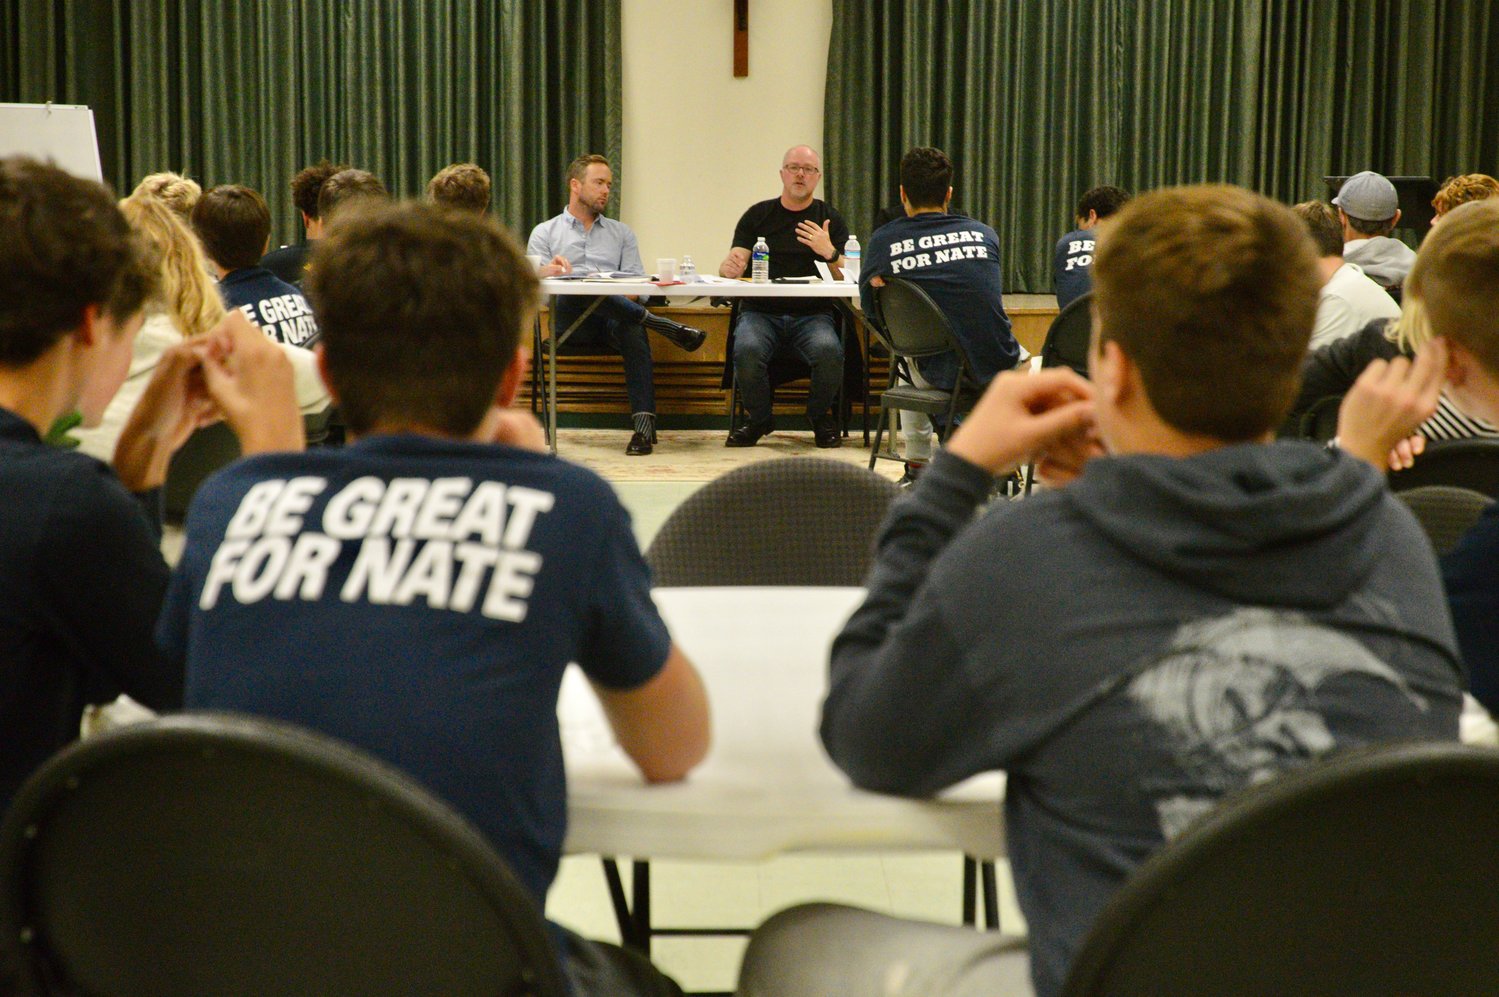 Co-director Erik Ewers talks about the upcoming documentary in front of more than 50 members of the community who came out to hear the PBS crew’s pitch Monday night at St. Barnabas Church. At left is his brother and co-director Chris Ewers. Some students were wearing “Be Great for Nate” shirts in honor of their late friend, Nate Bruno.